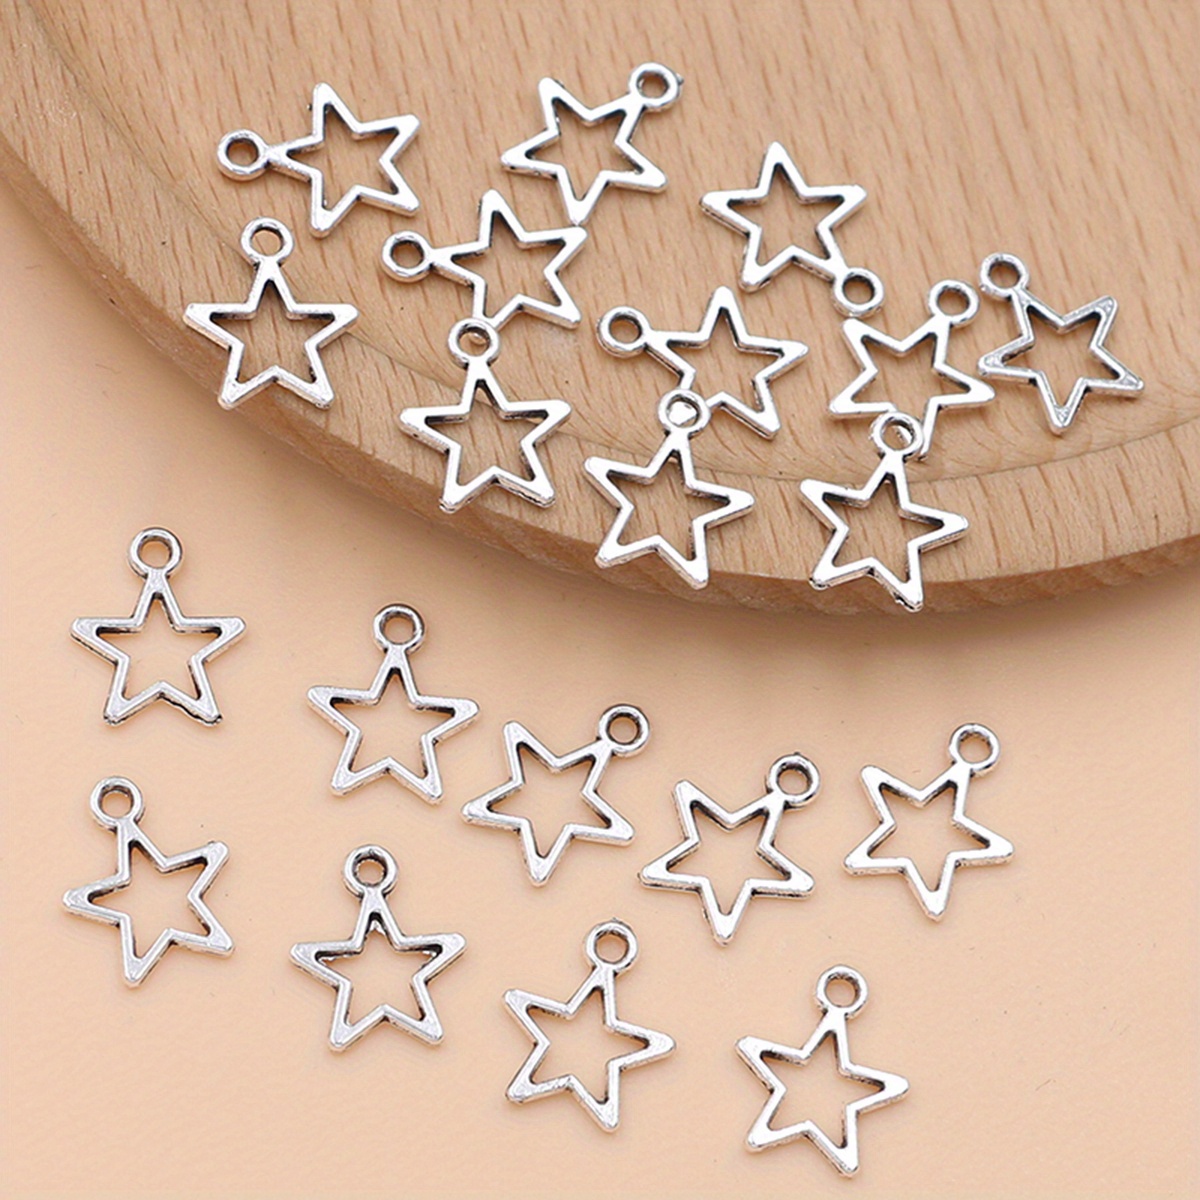 Inbagi 200 Pieces Star Pendant Mini Star Charms Alloy Dangle Star Shape Charm Dangle Making Charms for DIY Jewelry Making and Crafting, 8 x 10mm